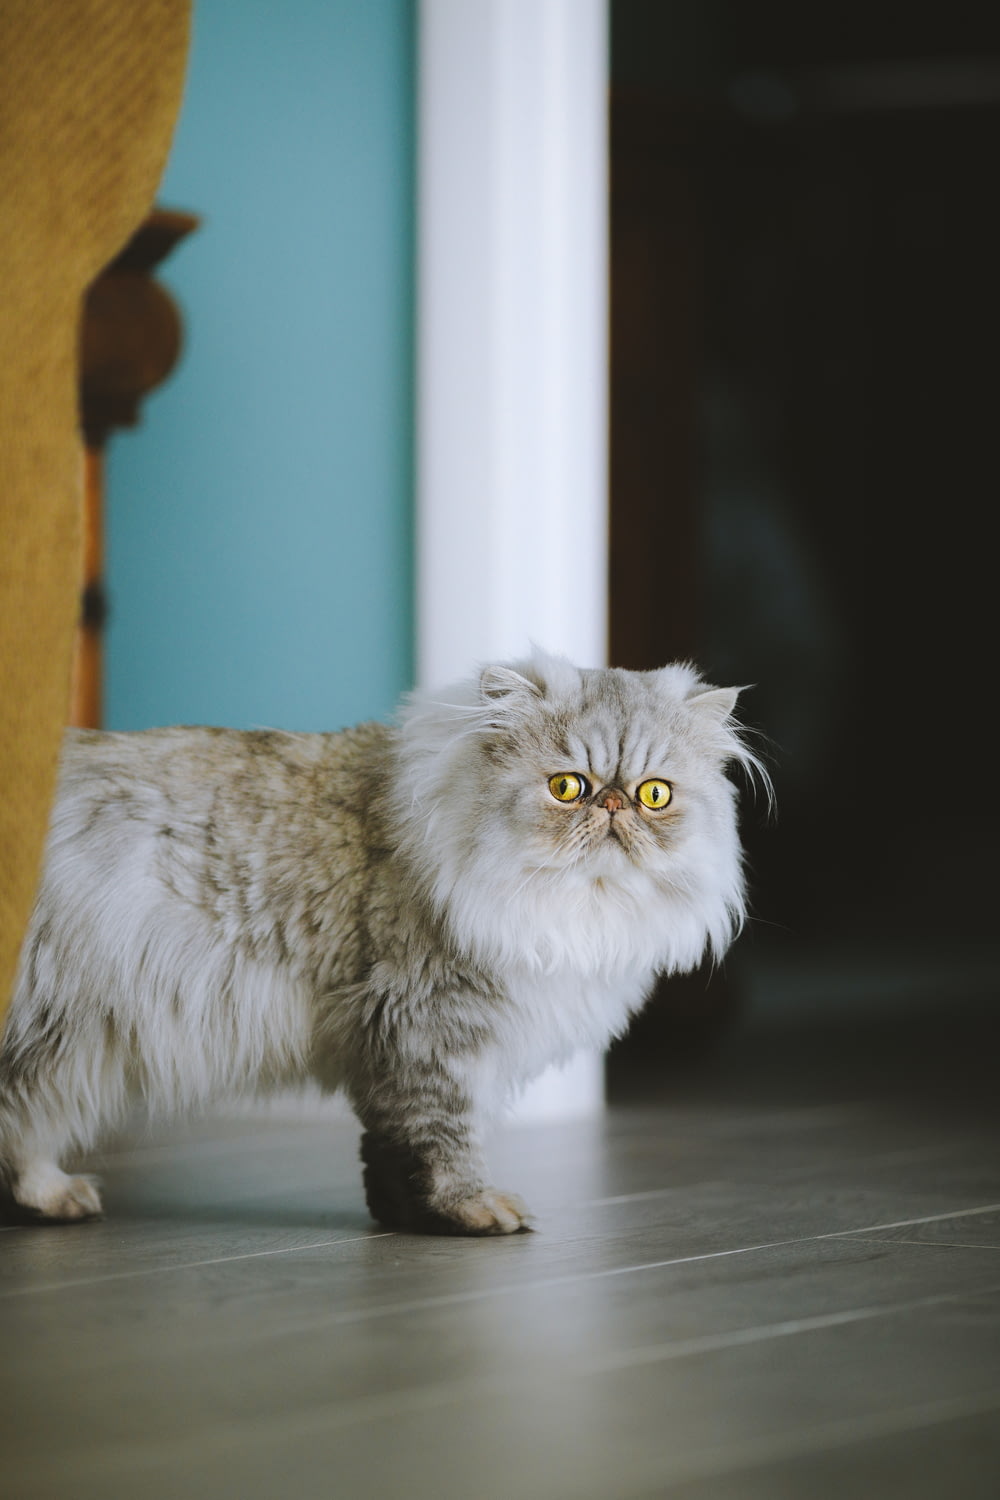 a fluffy cat standing on a hard wood floor